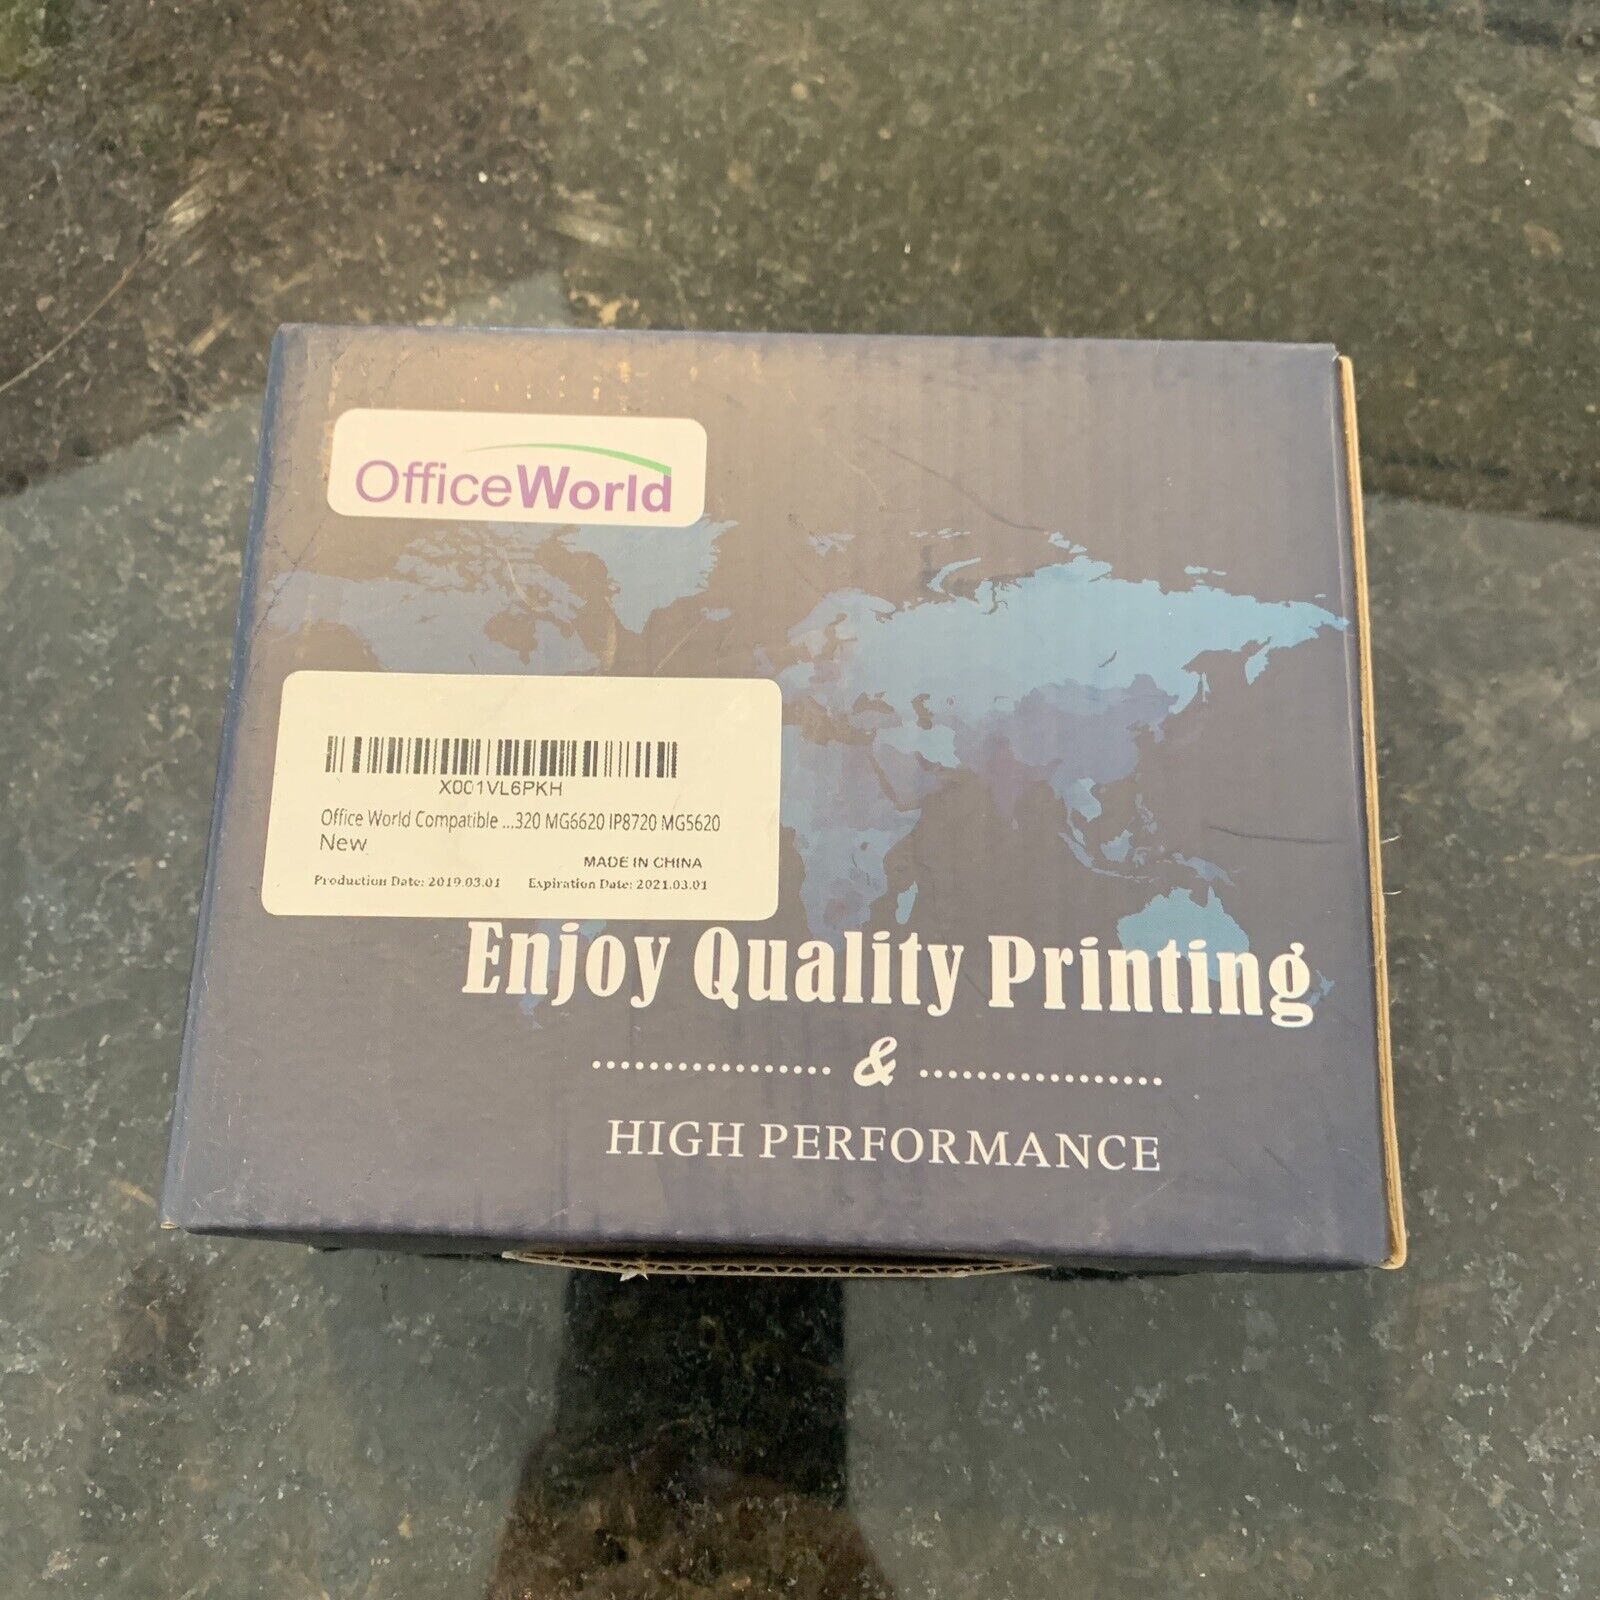 Office World Enjoy Quality Printing and High Performance: New